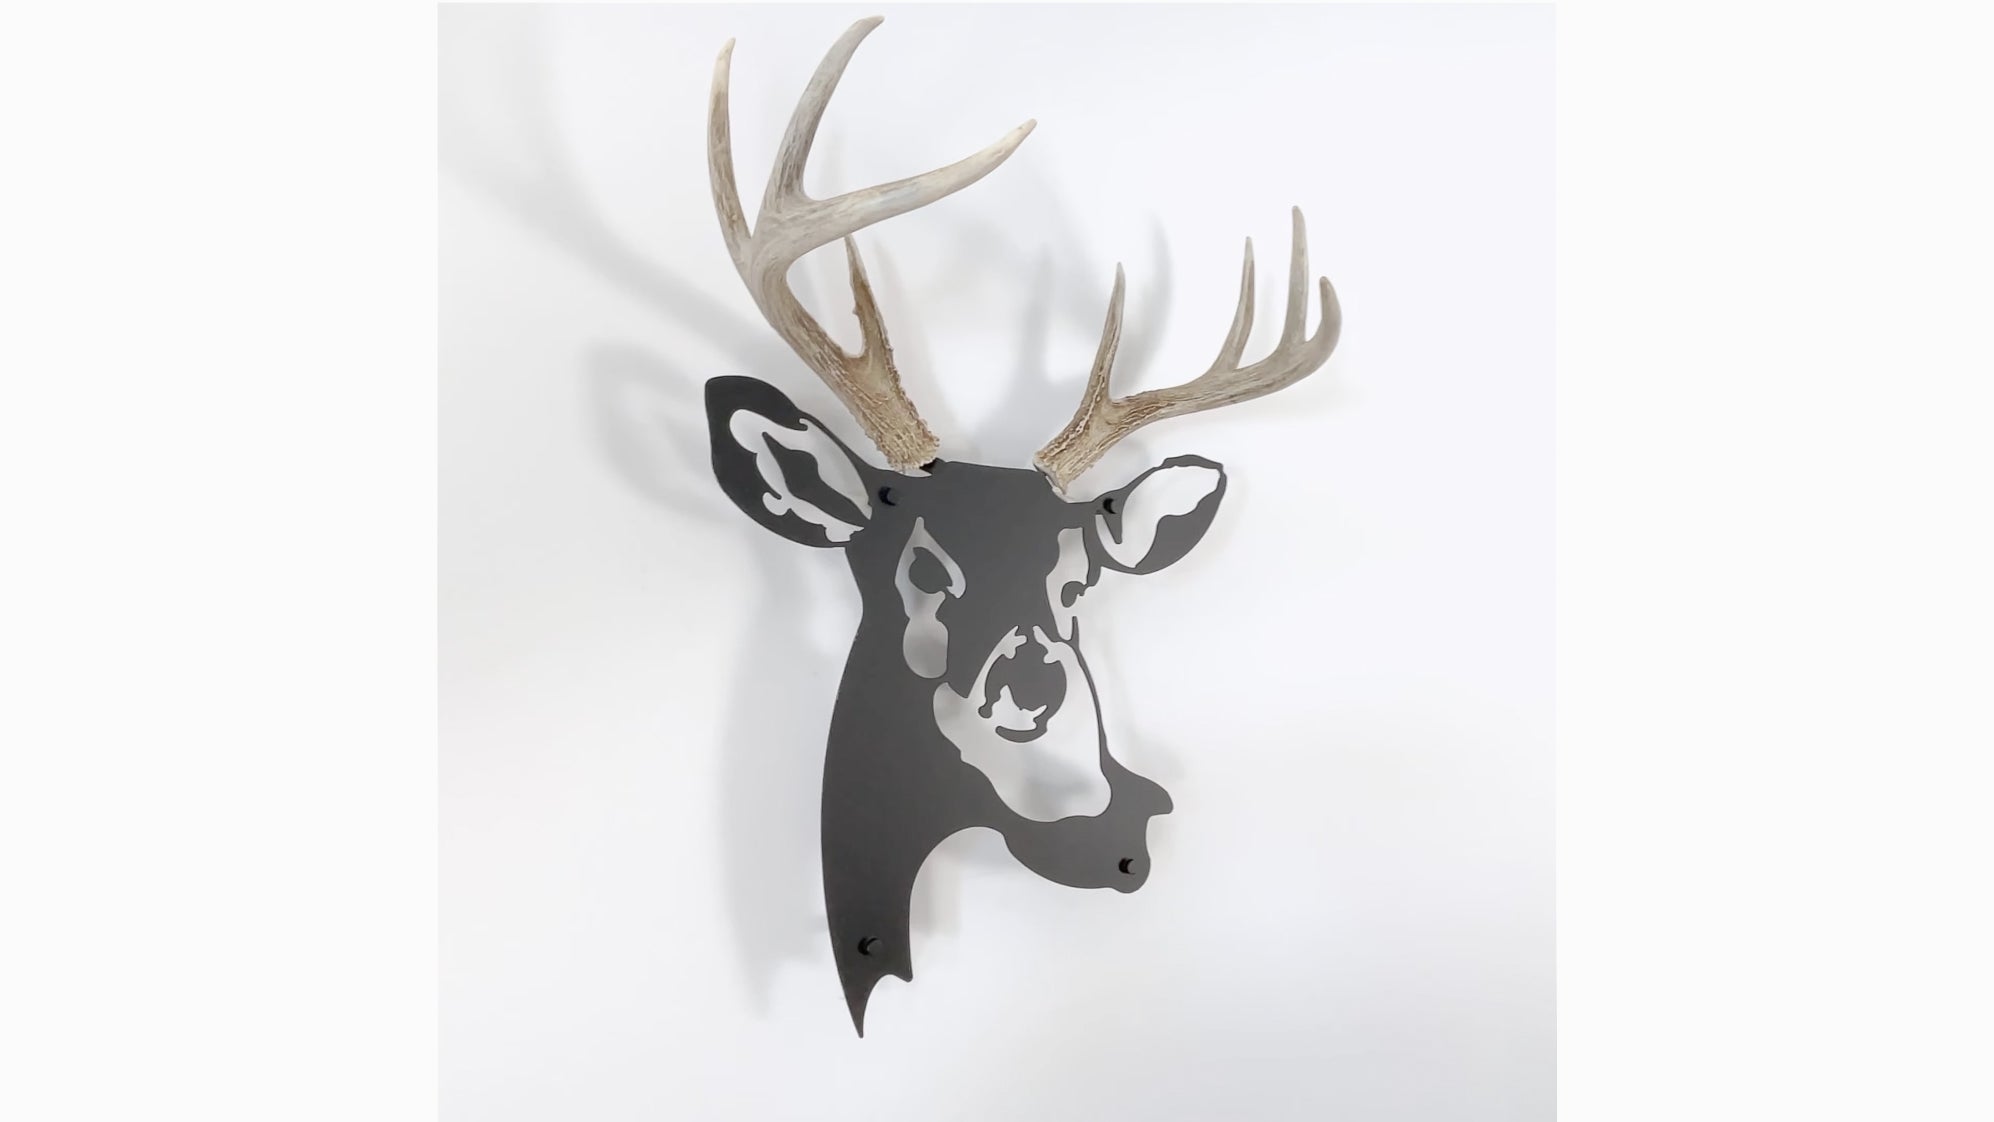 Load video: A video showing Dekor Nature Antlers &amp; Metal Wall Decors in real life